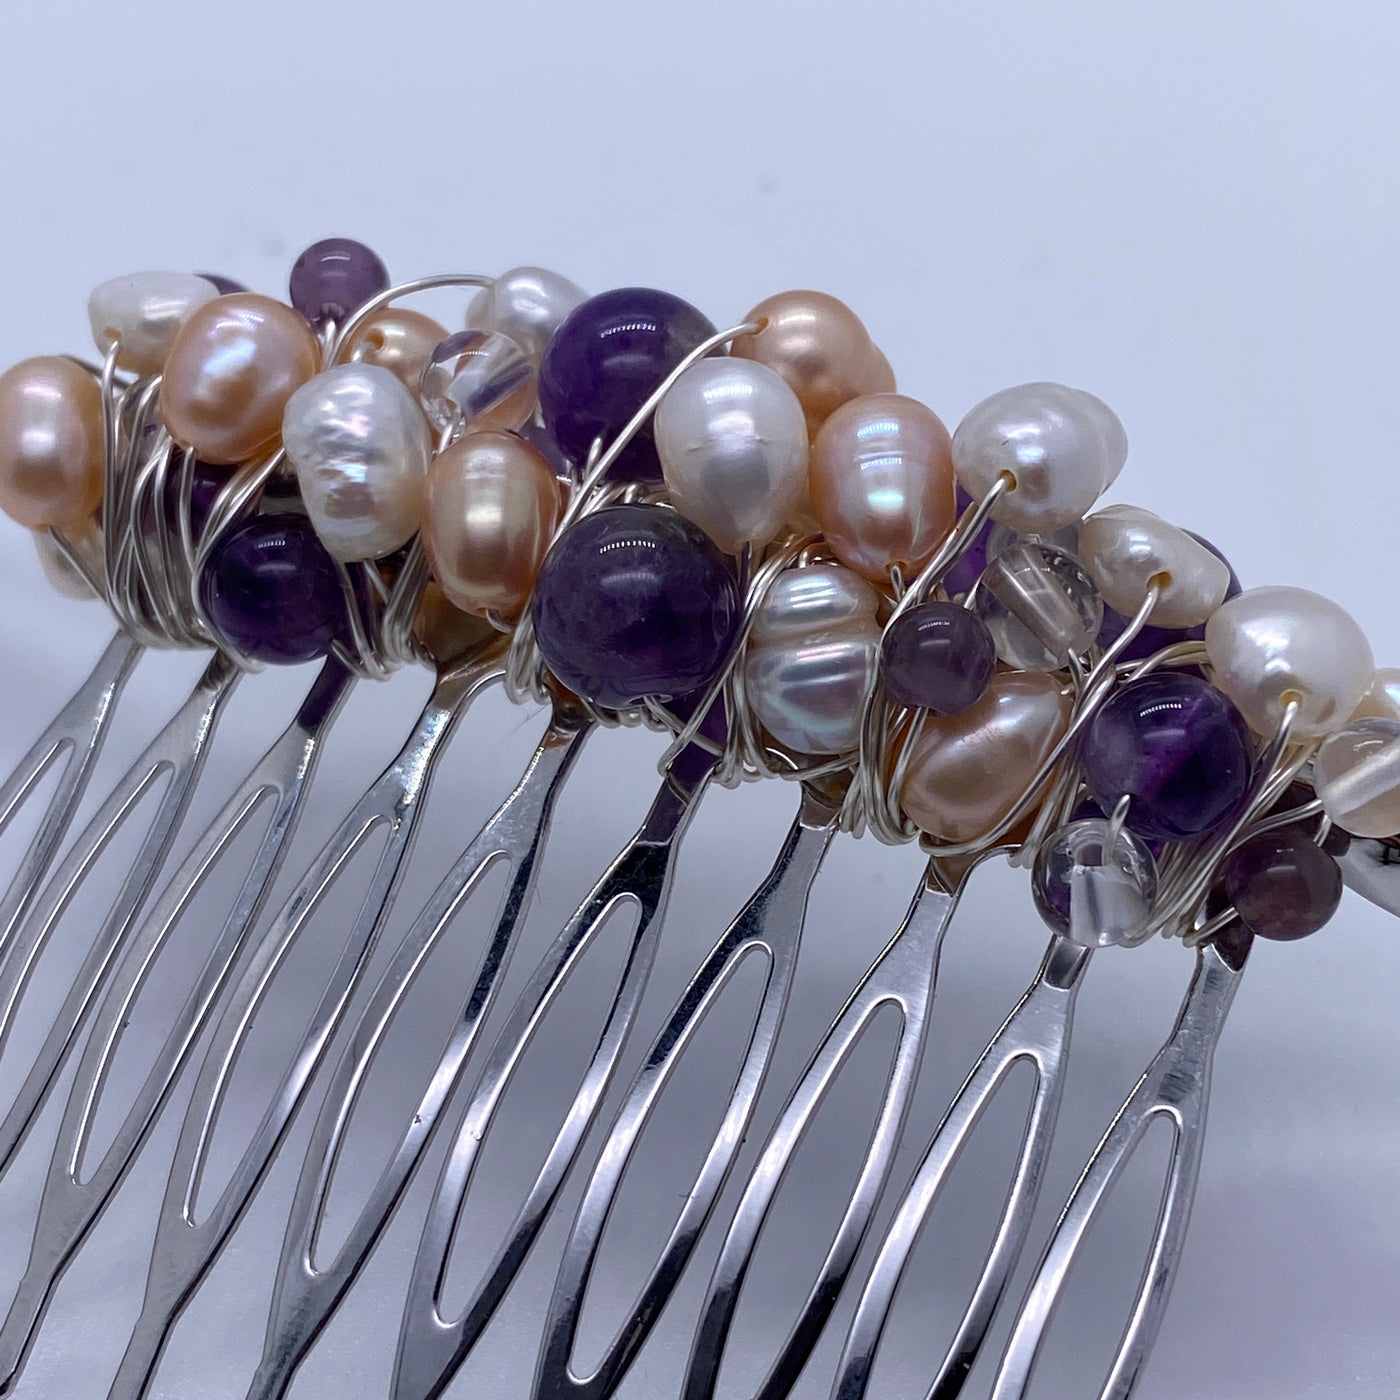 Freshwater pearls in different measures and colors (rose, white), chrystal beads, amethysts and silver wire for this french twist 10 teeths comb alloy metal bridal wedding hair side comb silver color